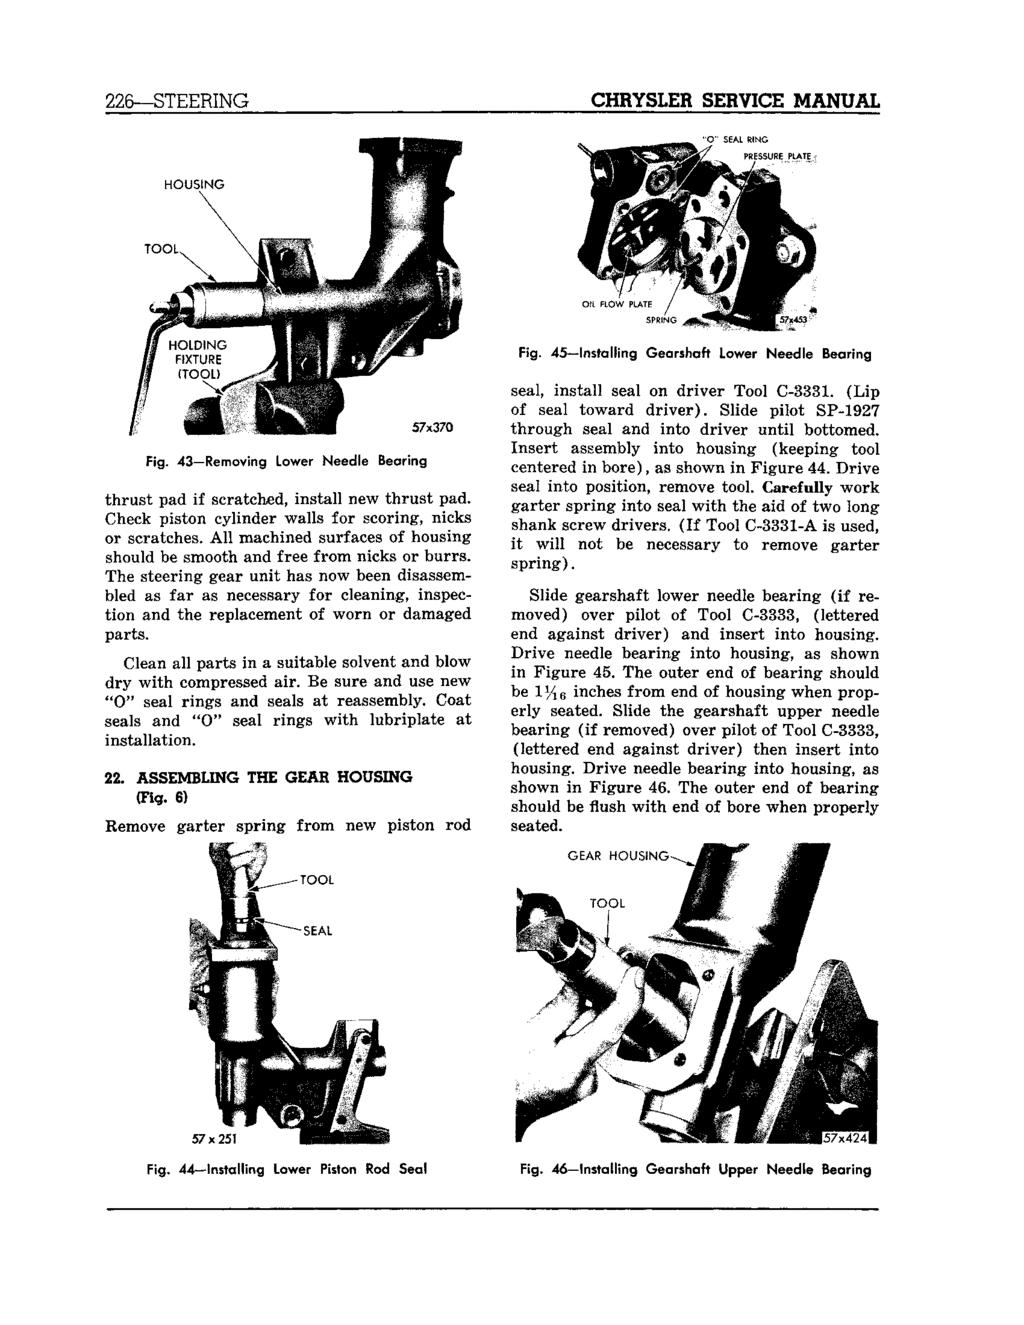 226 STEERING CHRYSLER SERVICE MANUAL Fig. 45 Installing Gearshaft Lower Needle Bearing Fig. 43 Removing Lower Needle Bearing thrust pad if scratched, install new thrust pad.